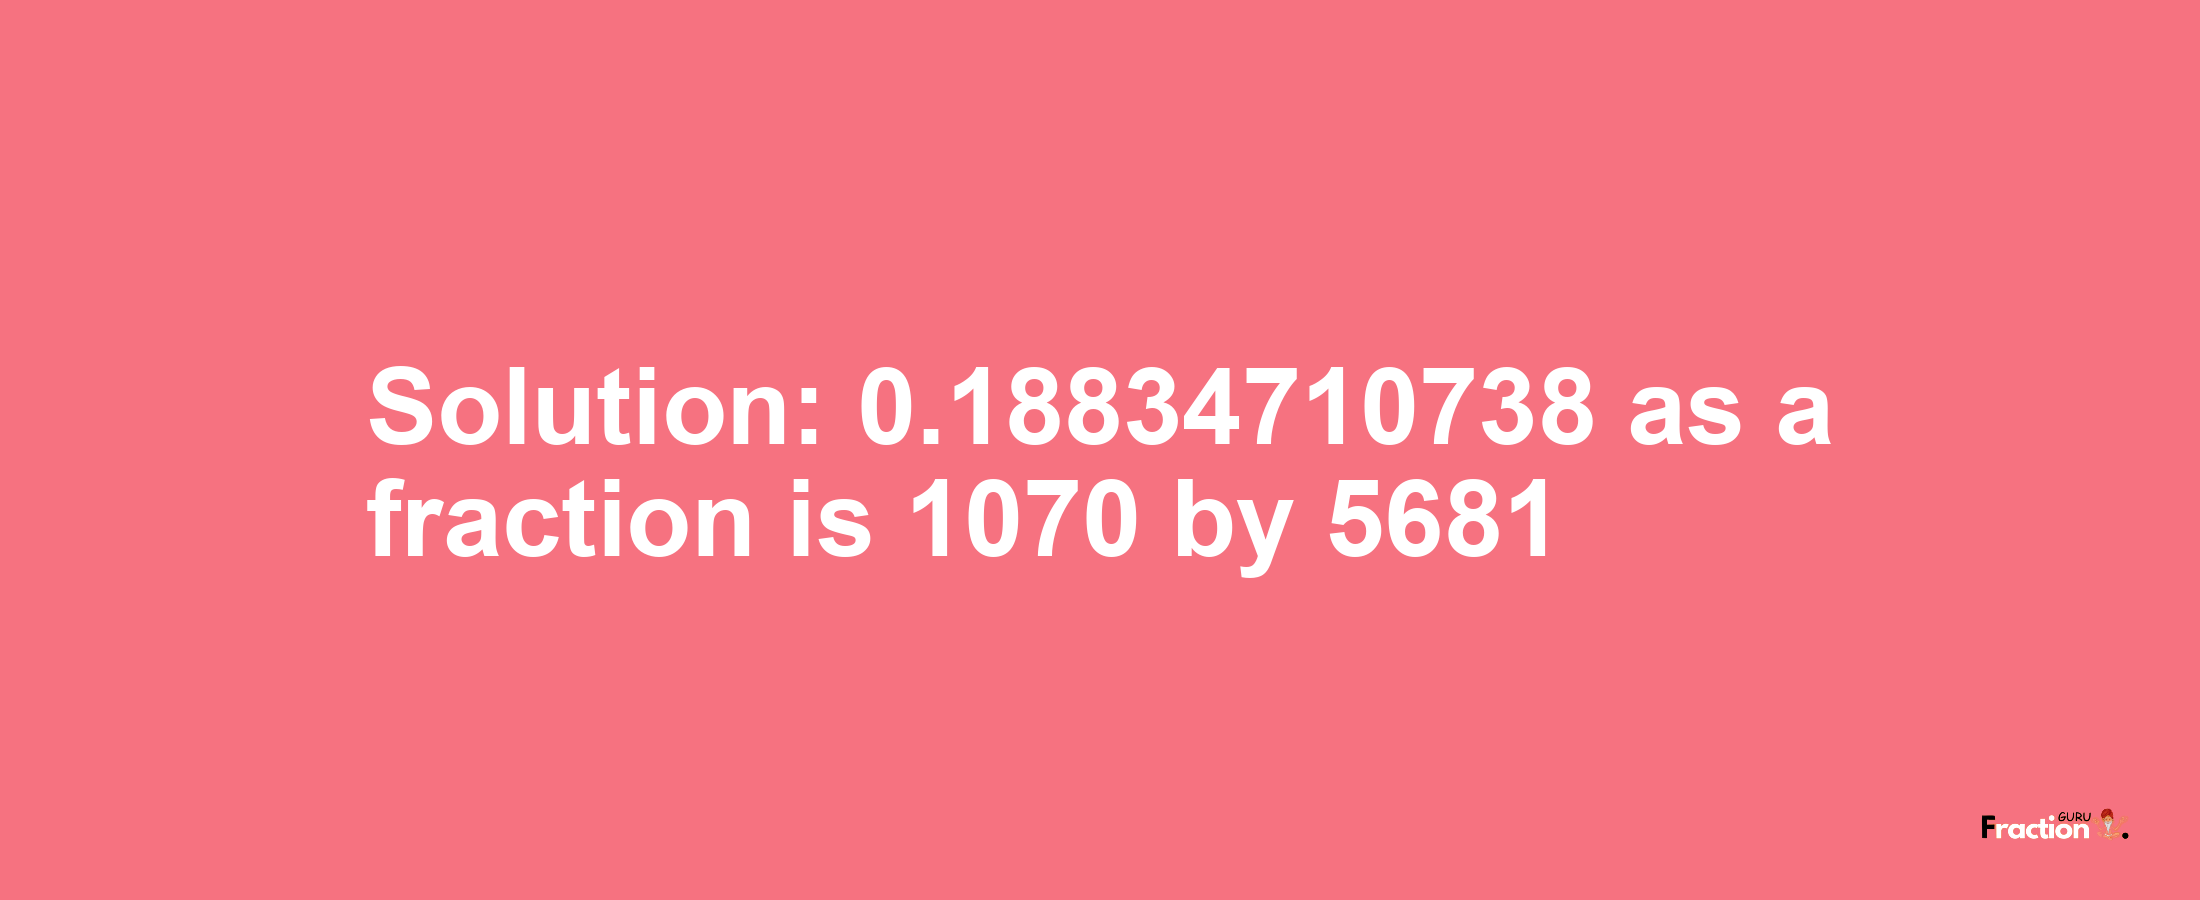 Solution:0.18834710738 as a fraction is 1070/5681